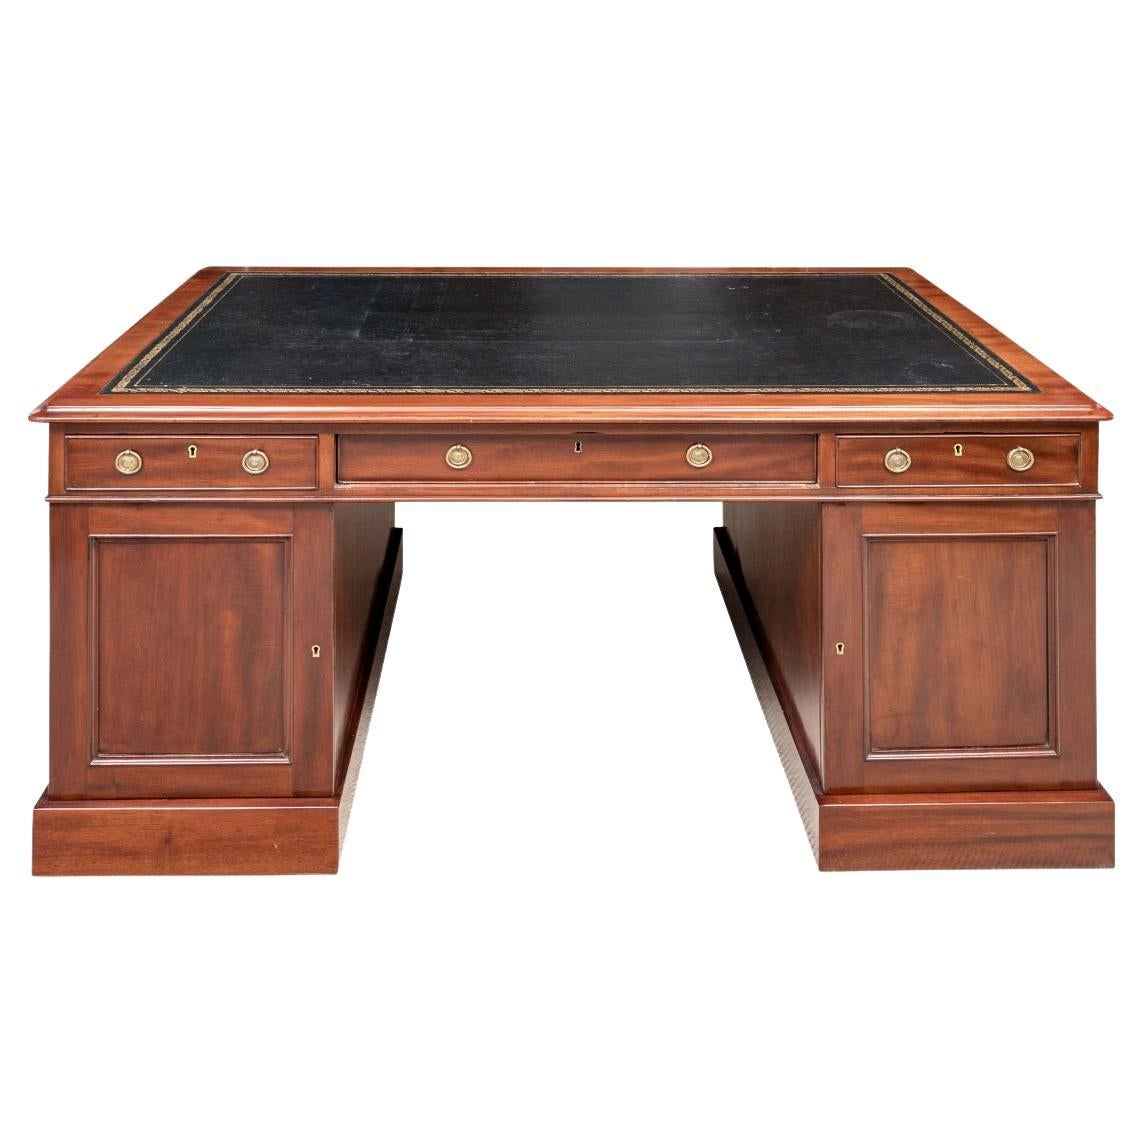 A Fine George III Style Mahogany Partners Desk For Sale